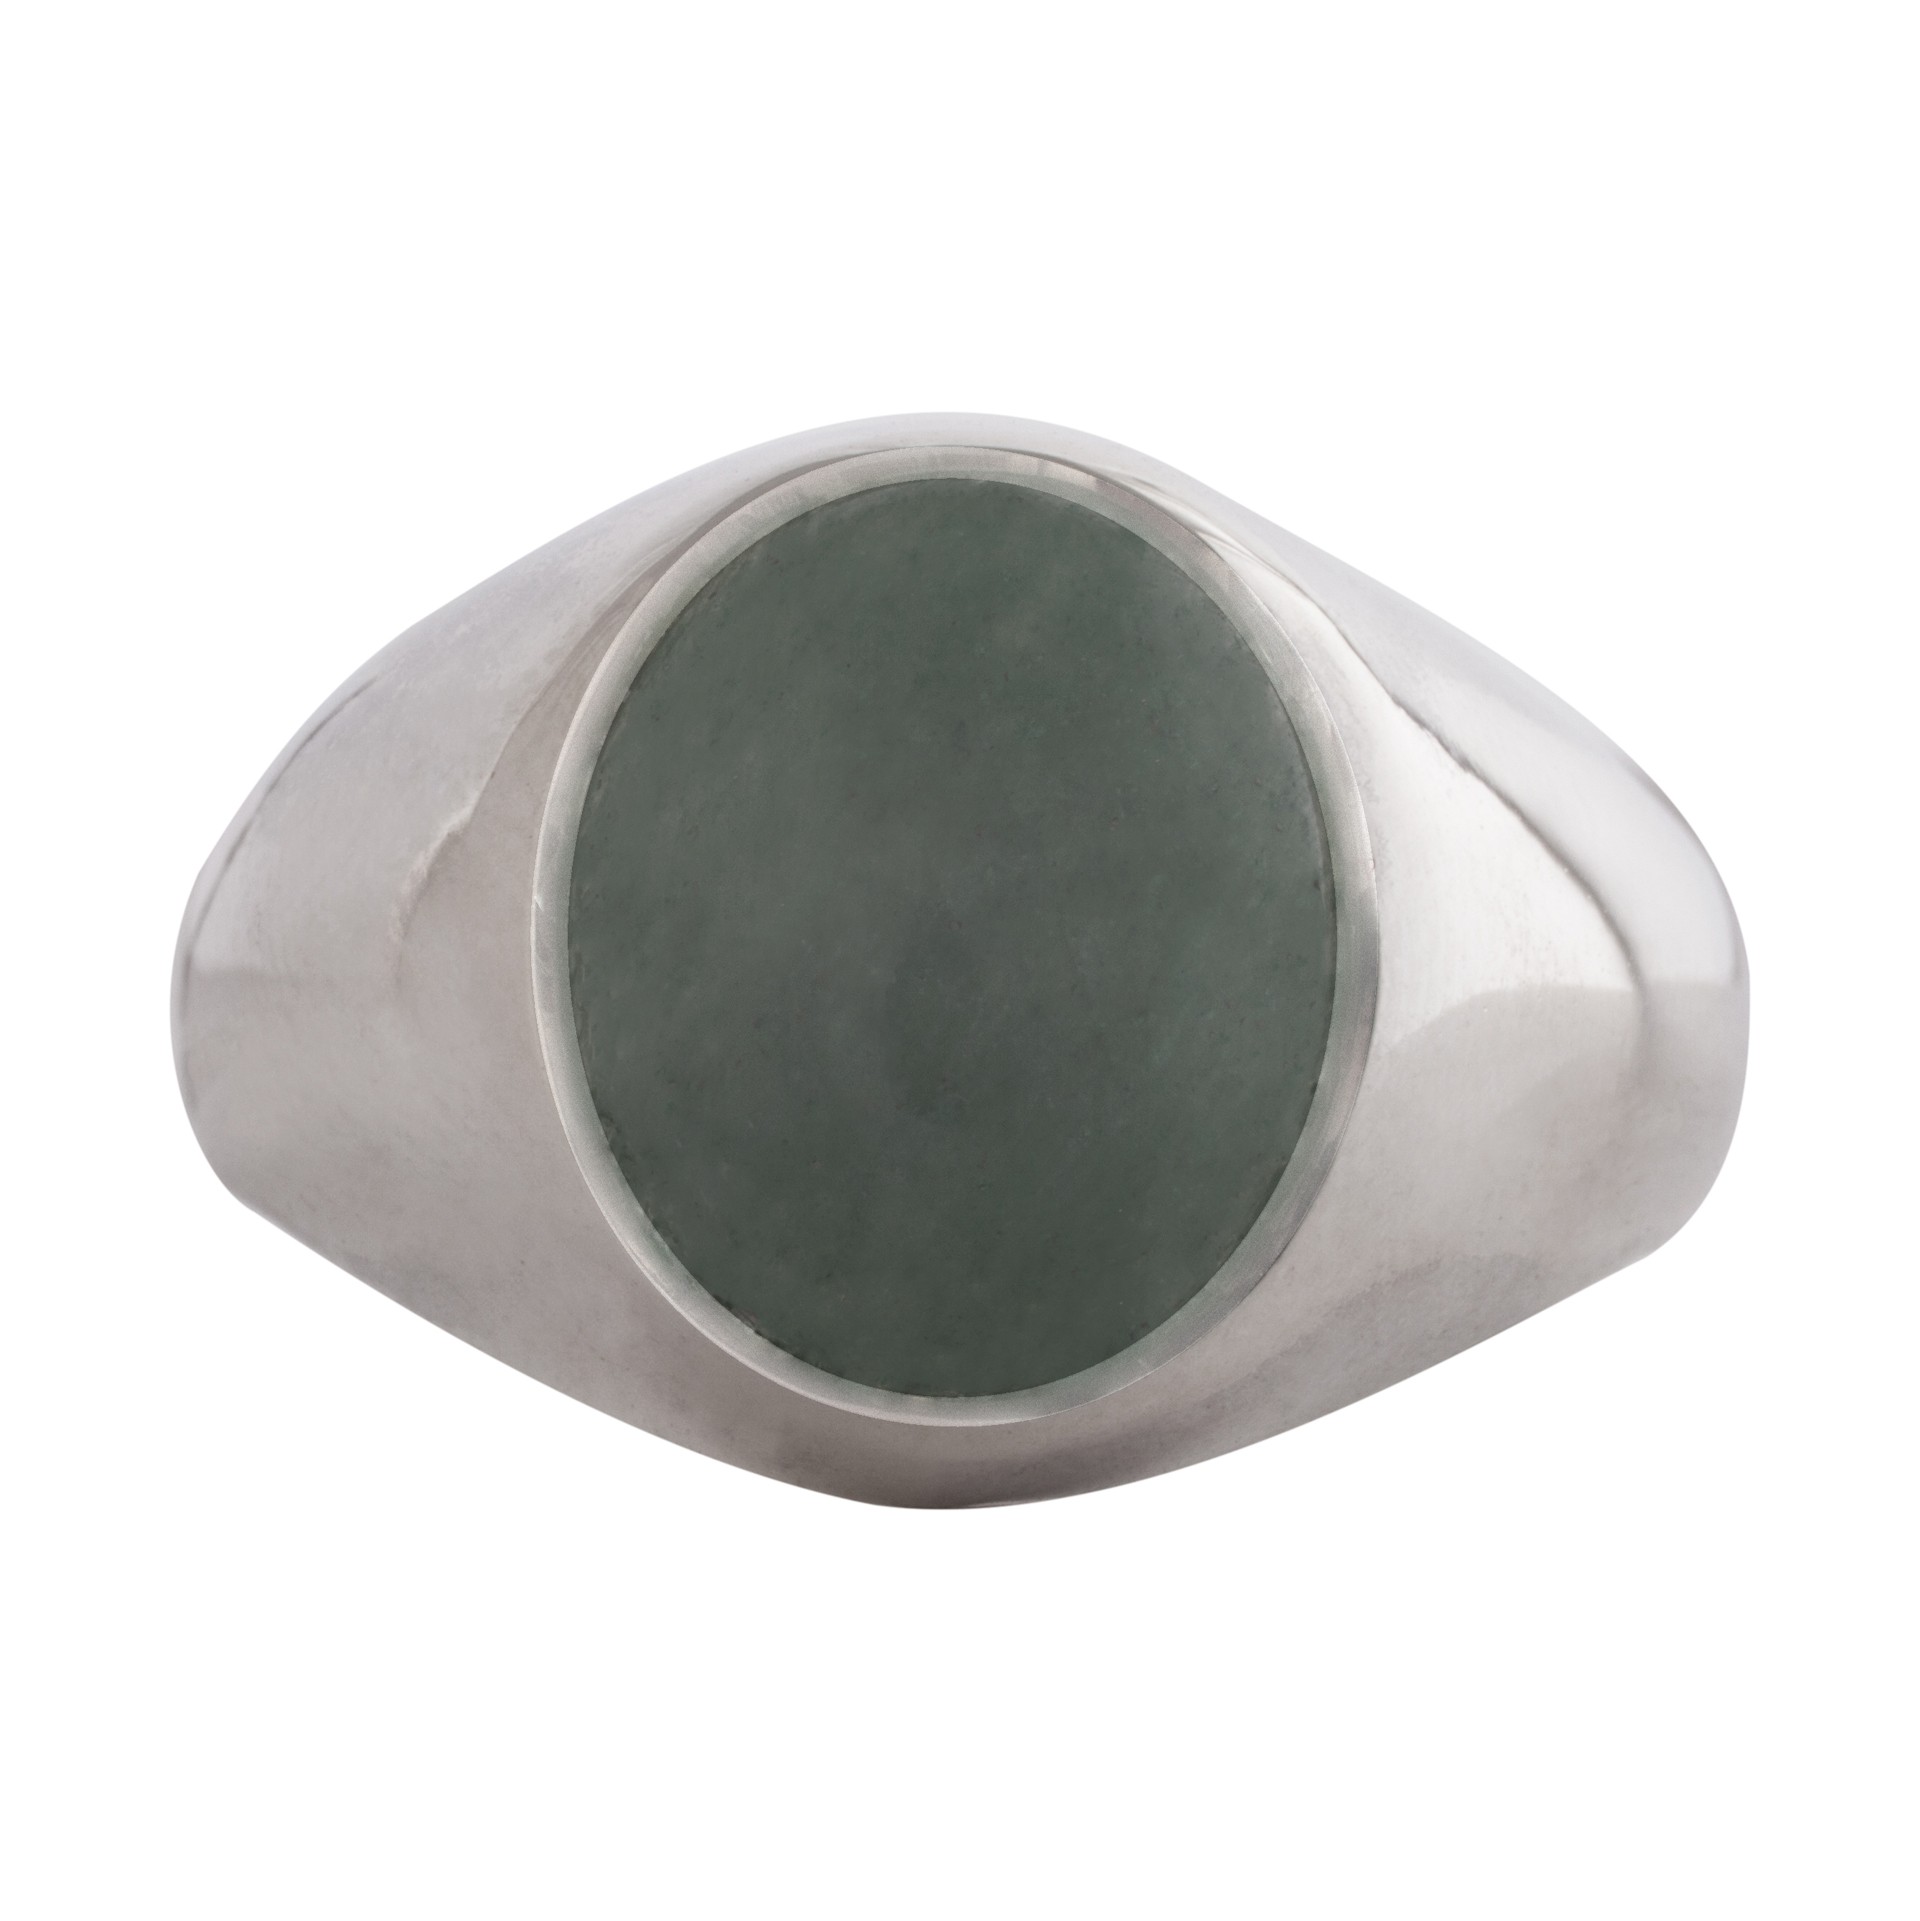 Green agate stone signet ring